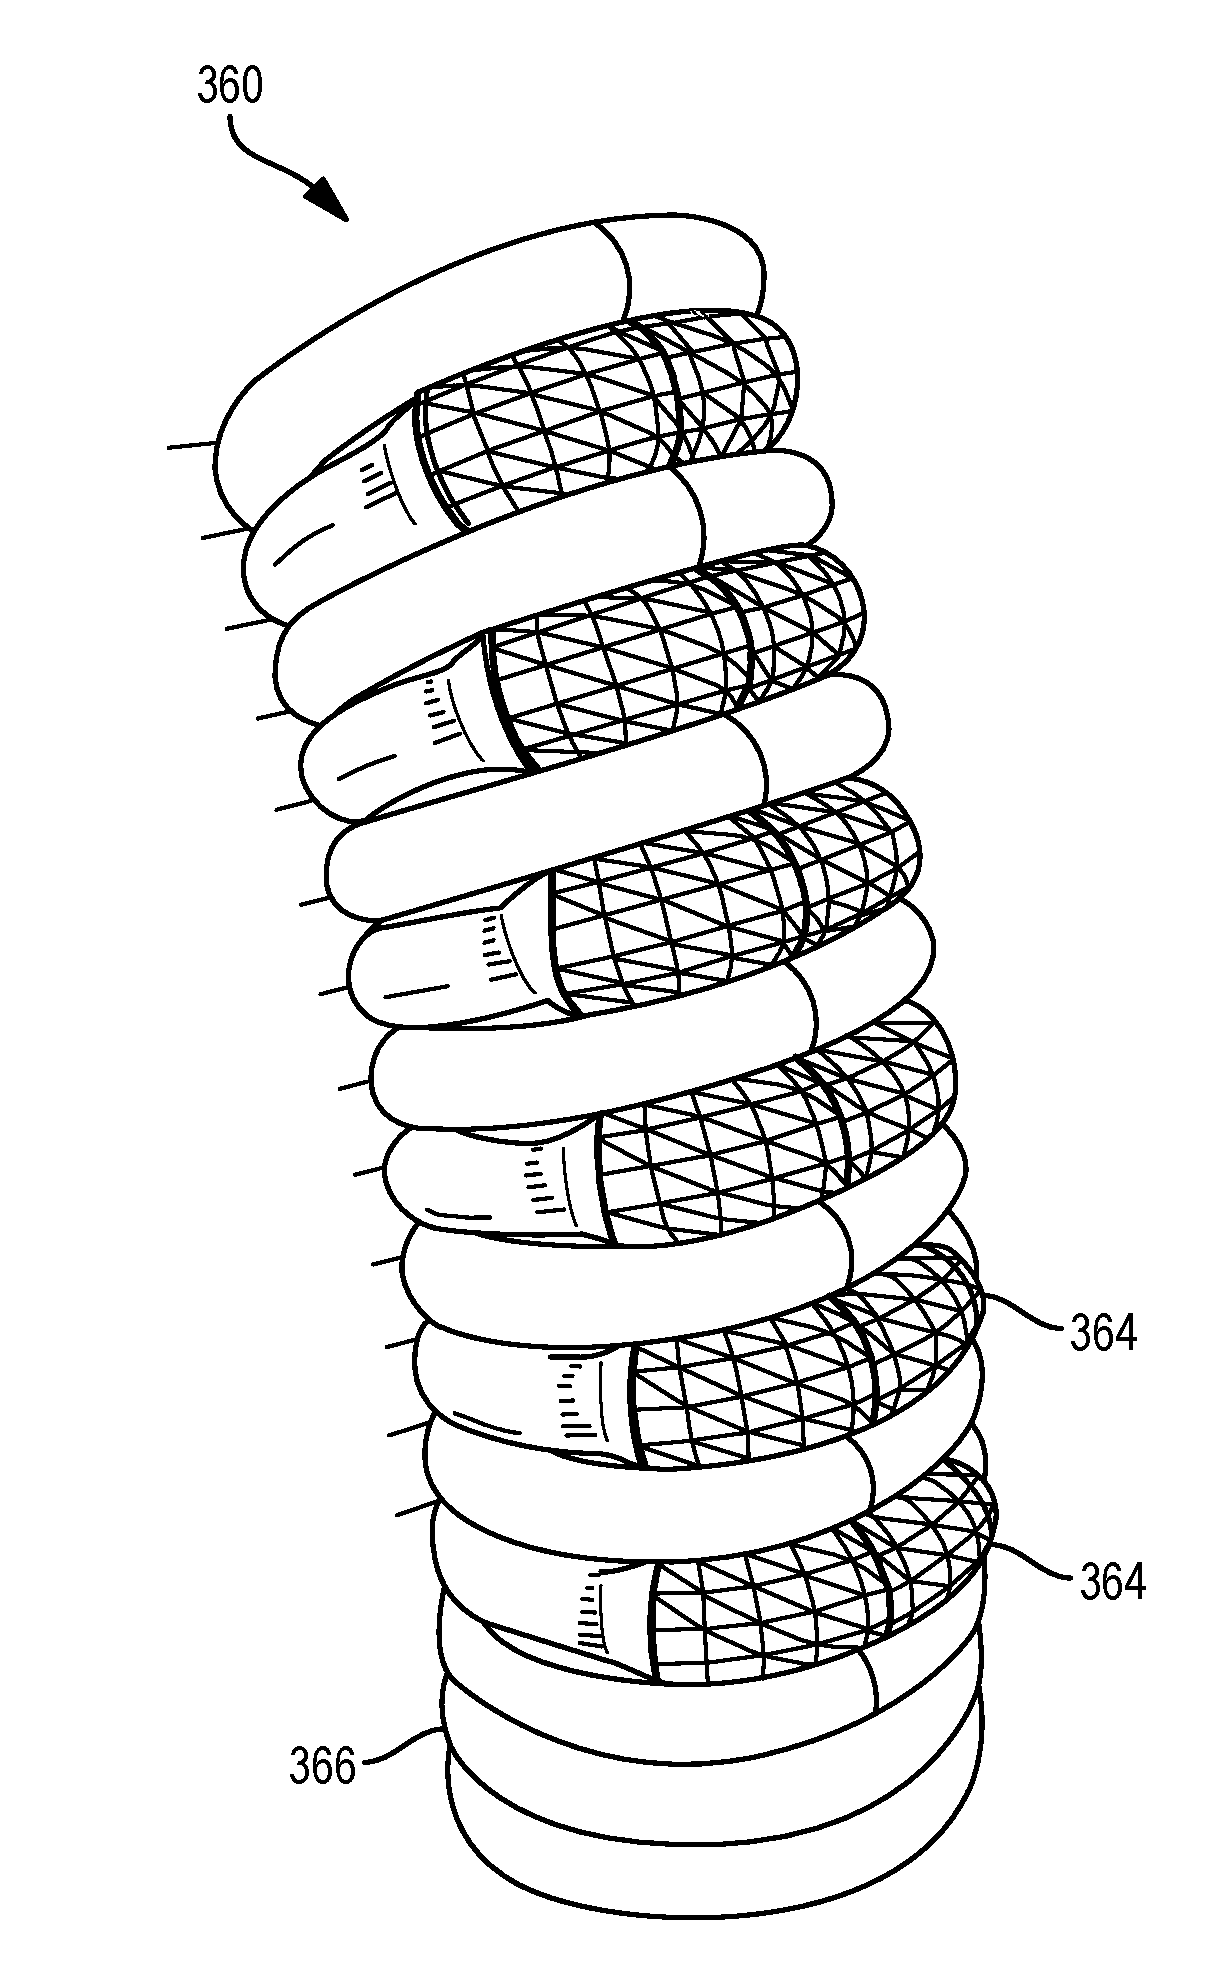 Articulation Systems, Devices, and Methods for Catheters and Other Uses